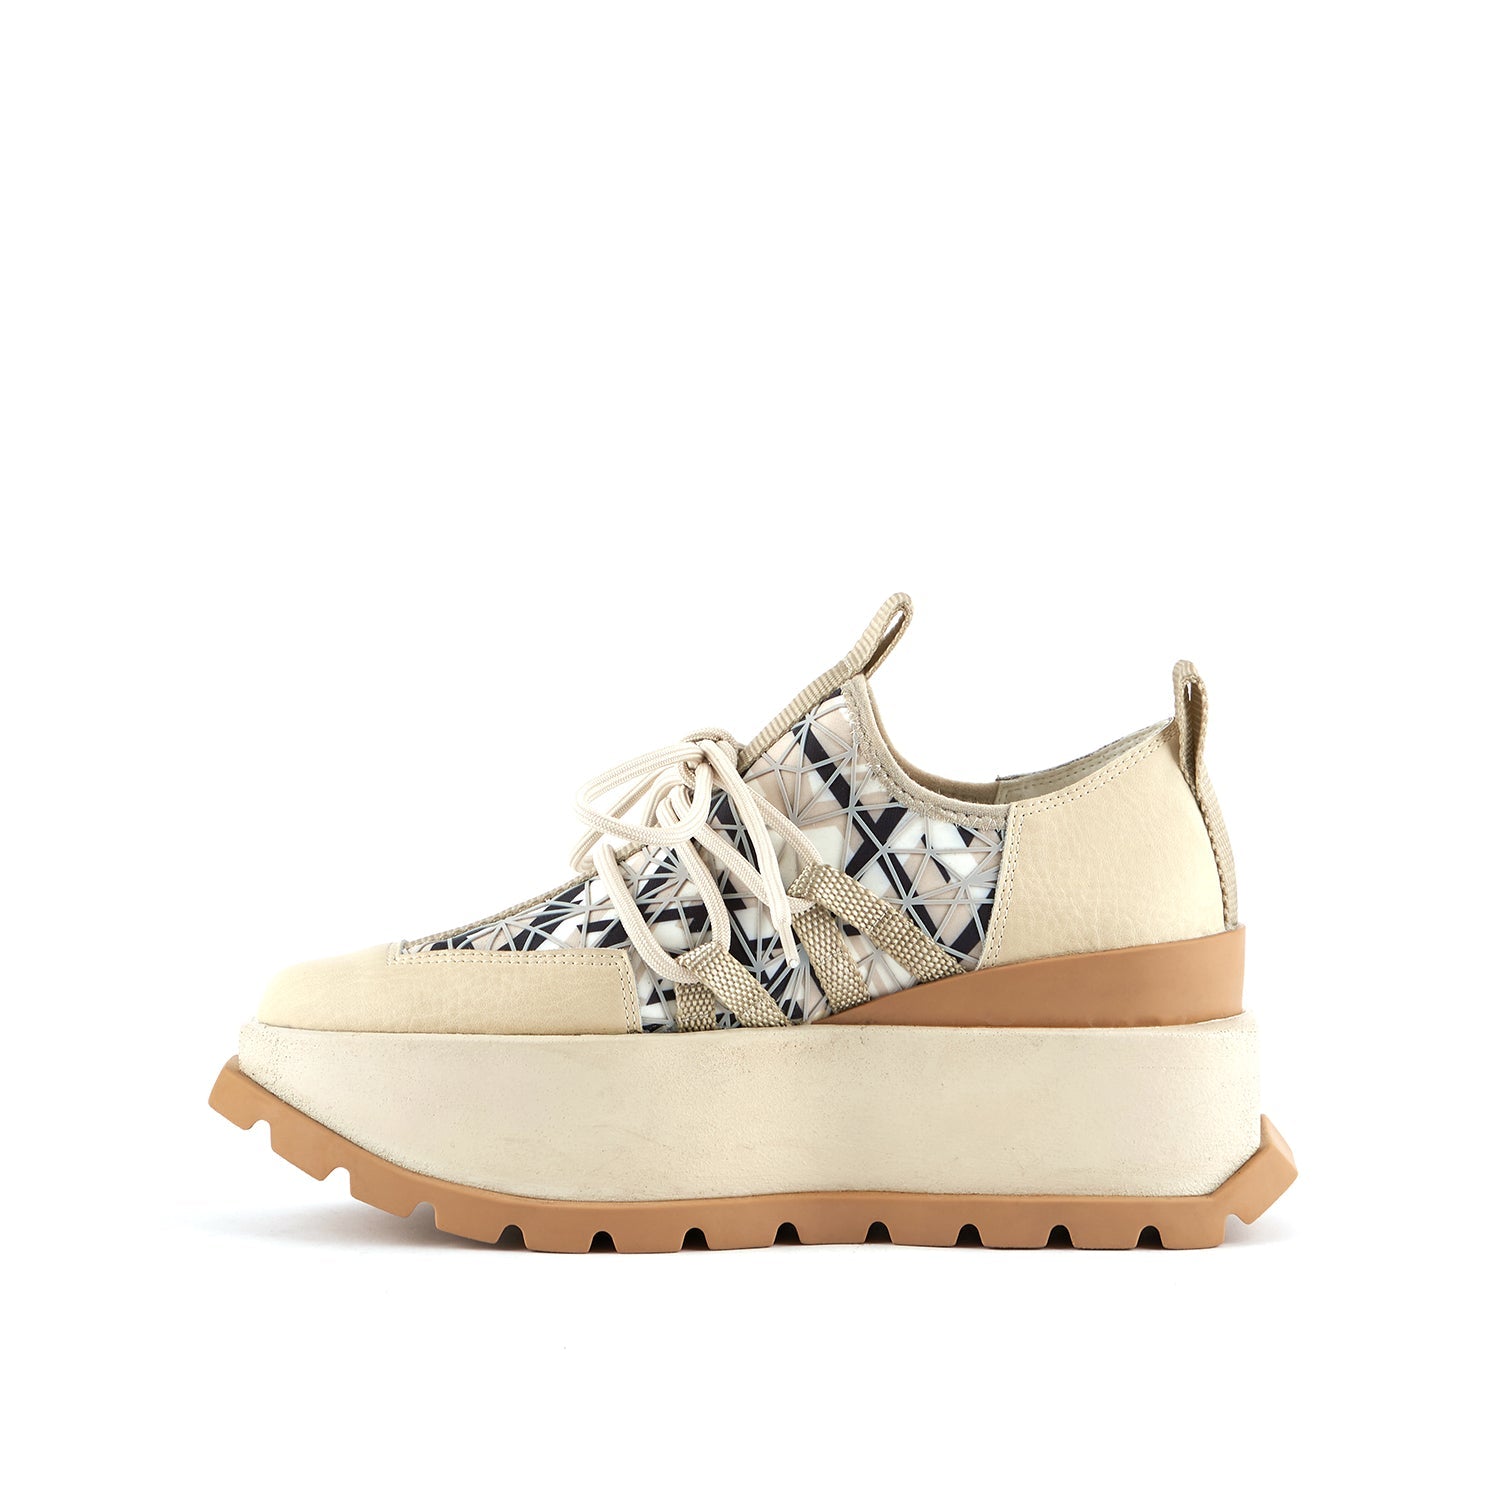 inner side view of the united nude roko hype sneaker in the color beige/natural. This sneaker has a wedge platform sole, a lace up front, and a black and white geometric design.